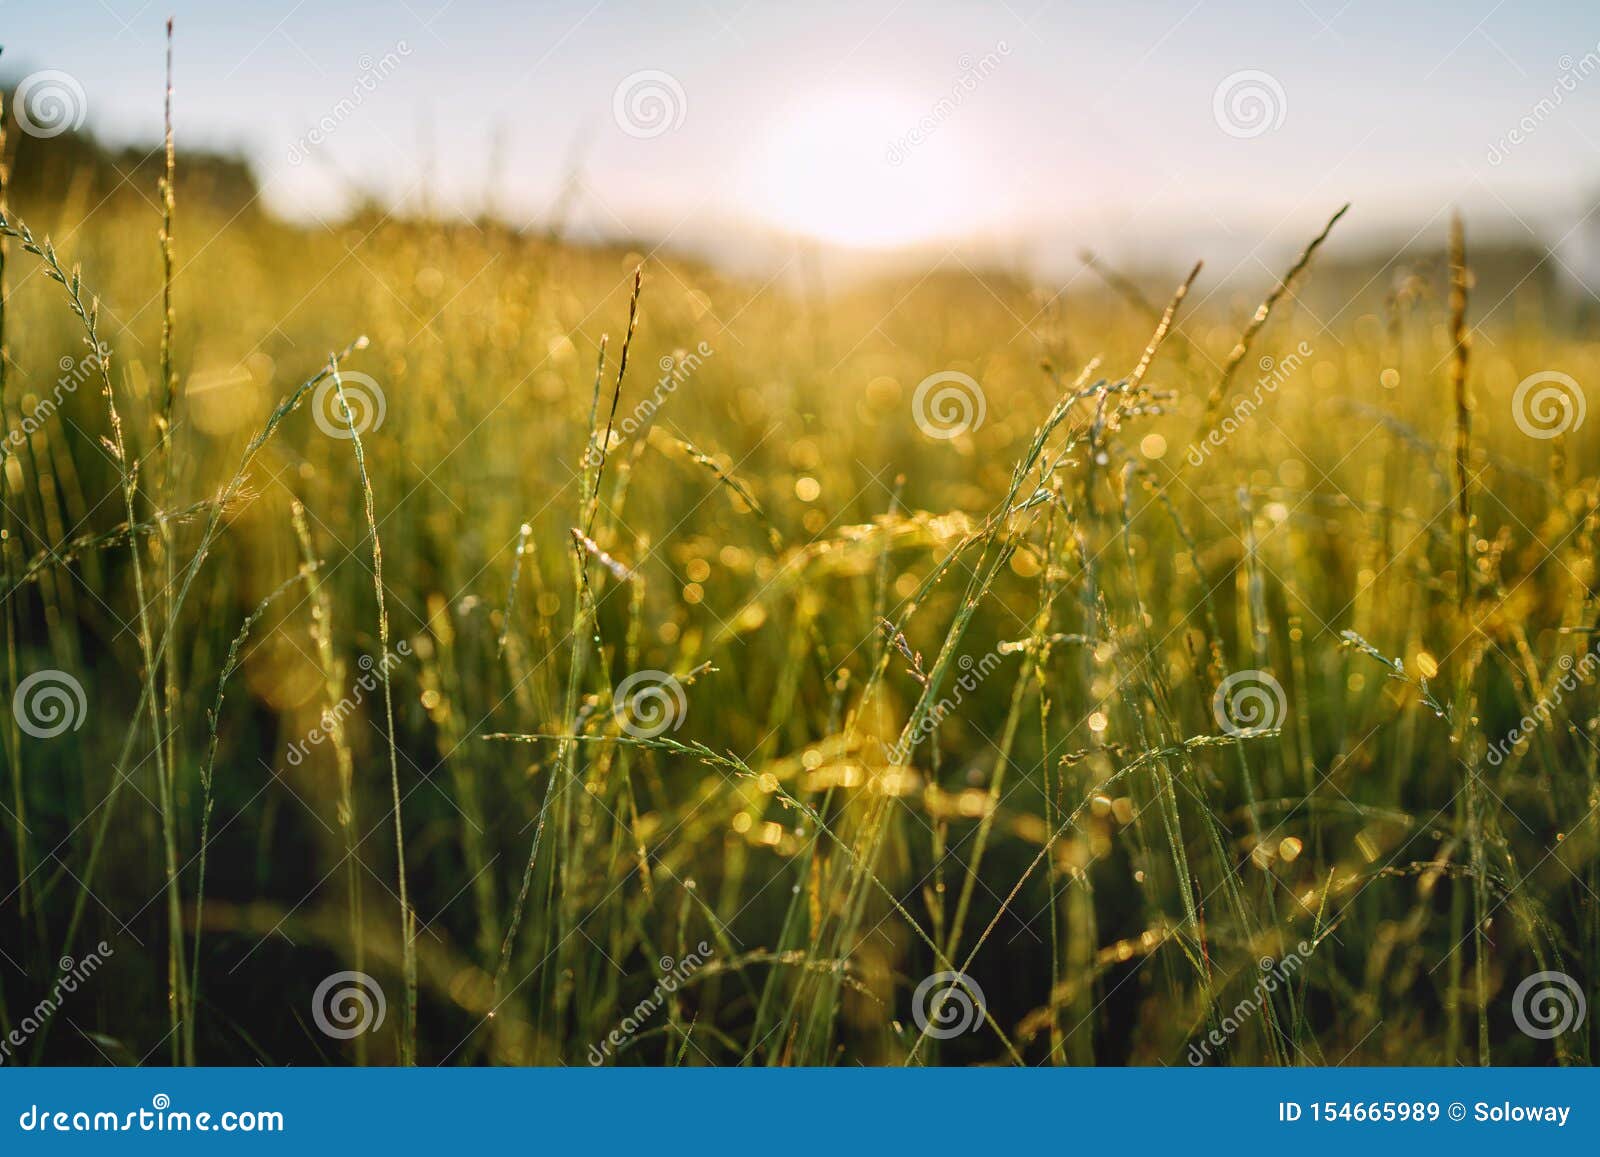 green hight grass covered with morning dew with bright sunlight beams on background. wide opened aperture image